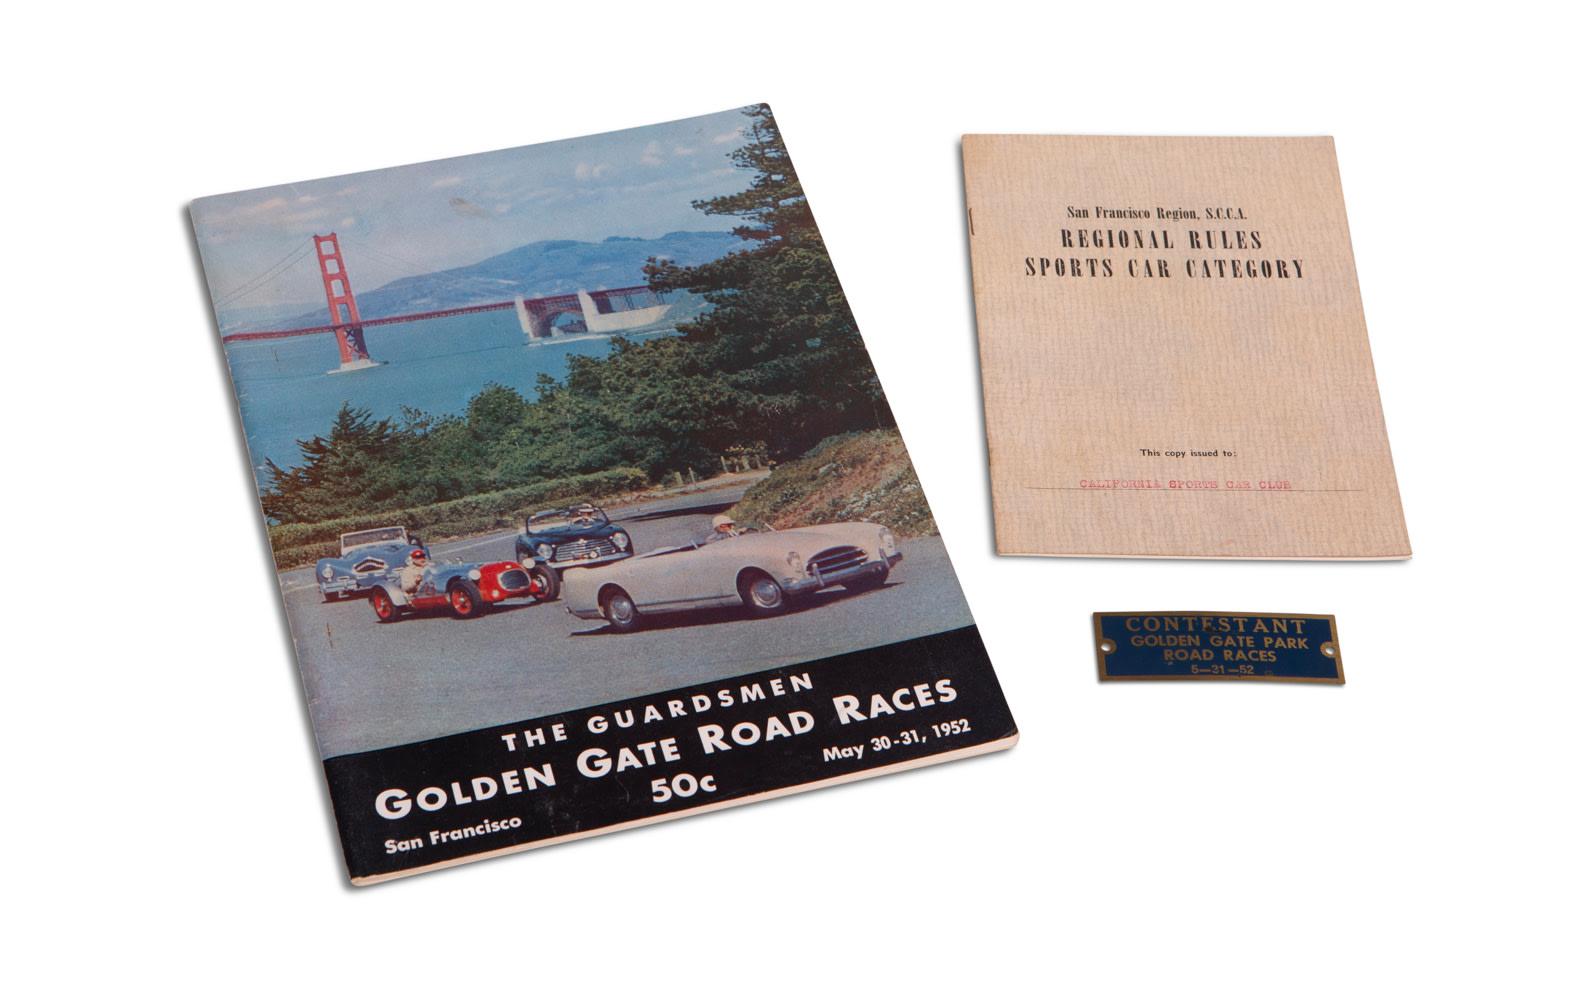 1952 Golden Gate Road Races Contestant Badge, Regional Rule Book, and Official Race Program